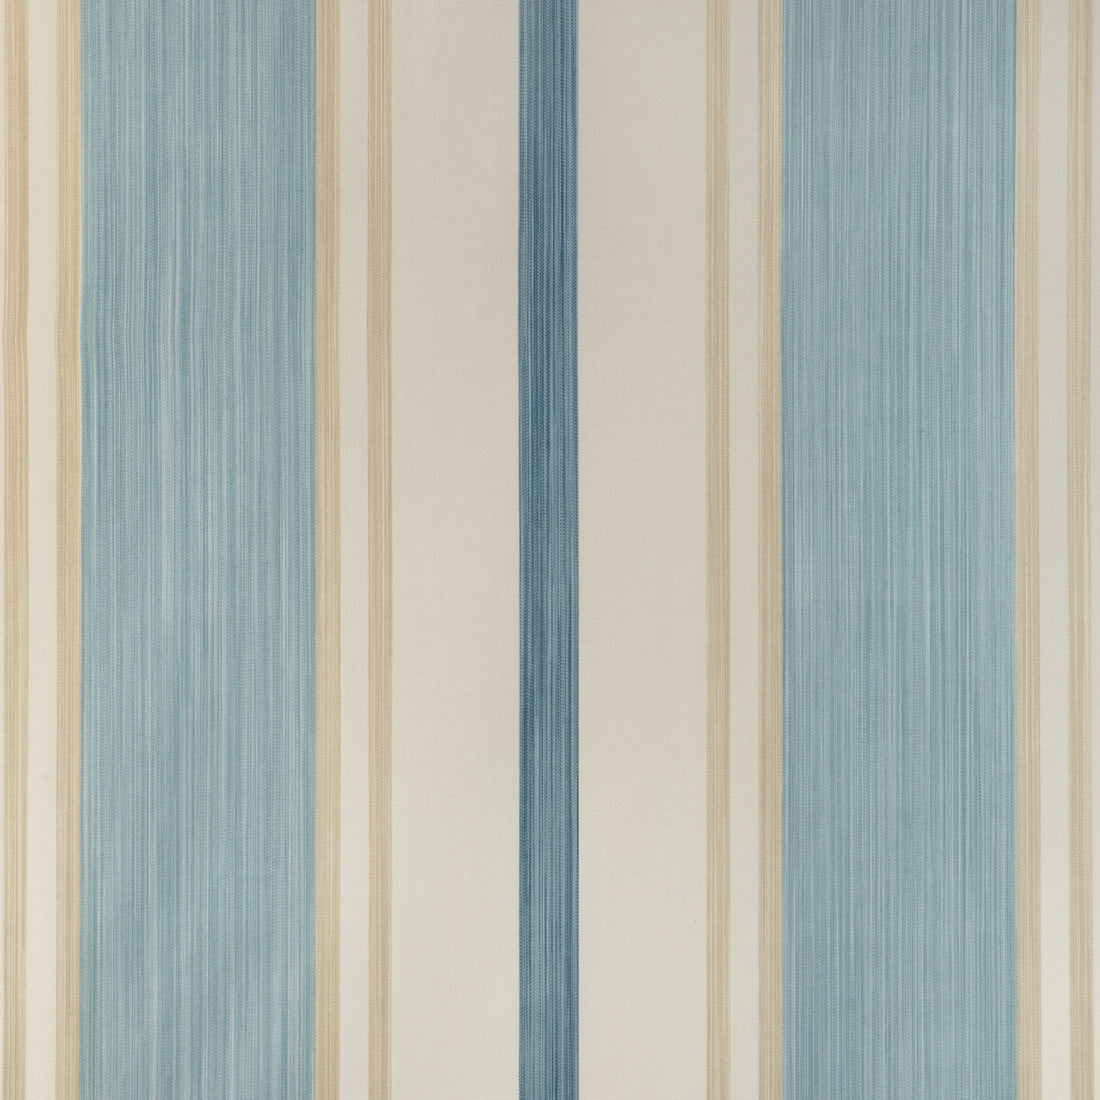 Davies Stripe fabric in sky/sand color - pattern 2023110.516.0 - by Lee Jofa in the Highfield Stripes And Plaids collection